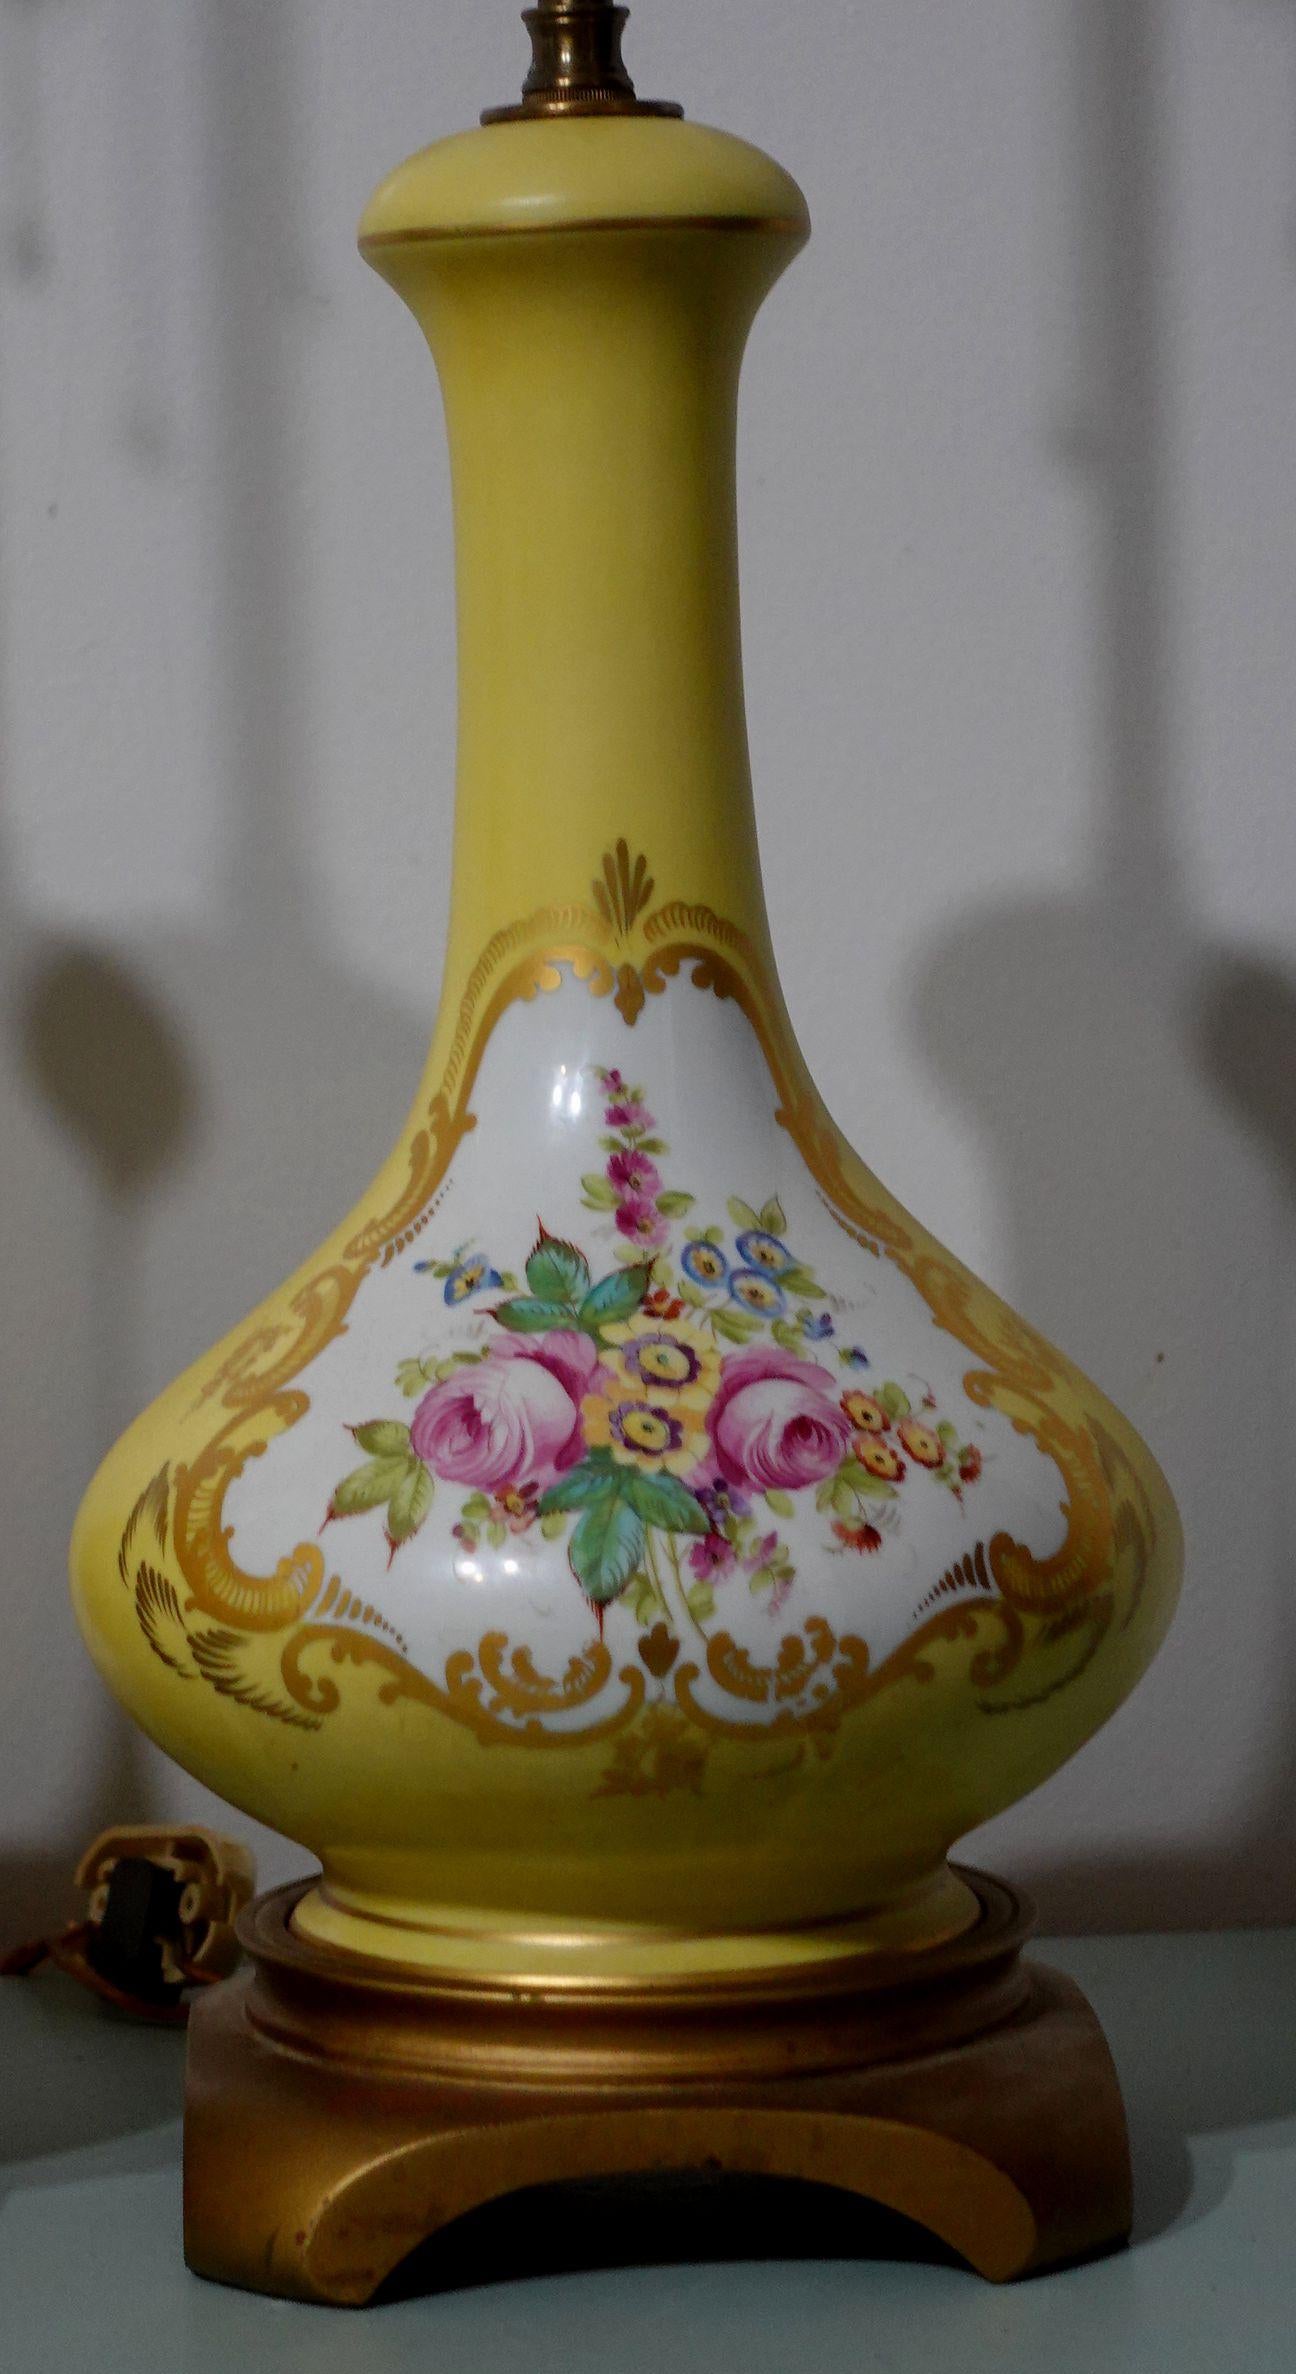 North American Antique Pair of Shaped Hand-Painted Reserved Floral Lamps, 1900s For Sale